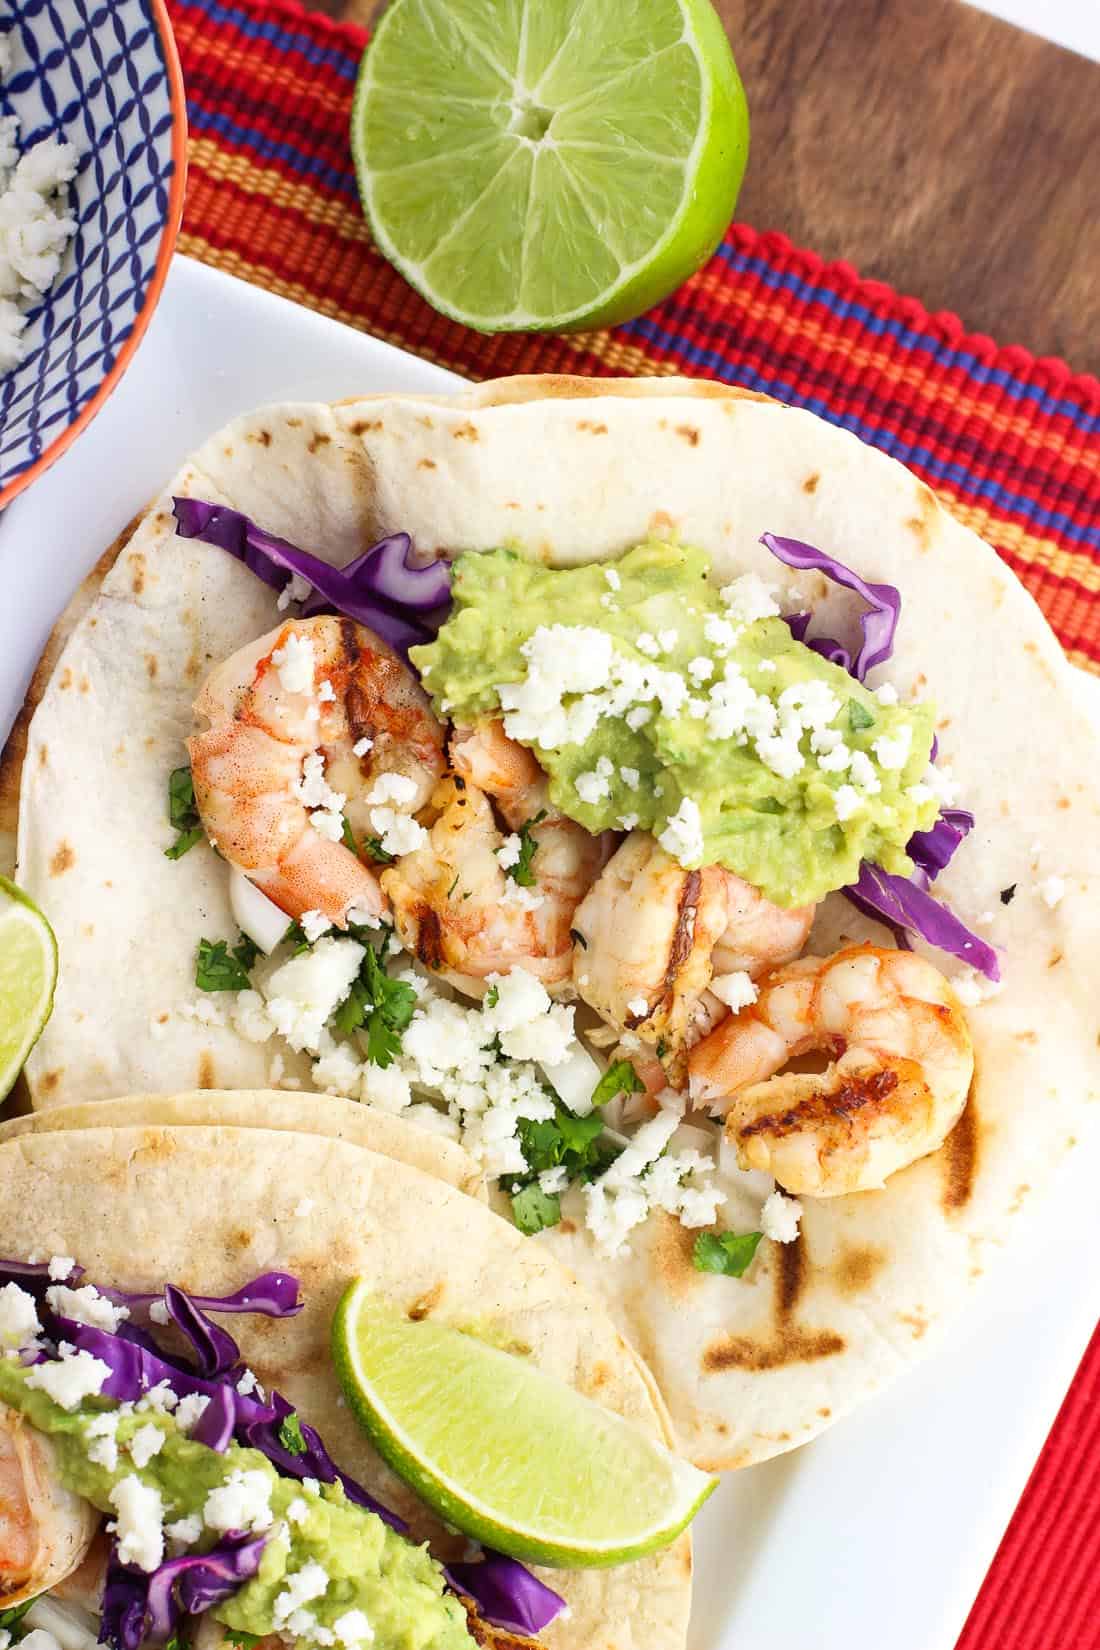 Shrimp tacos with guacamole and red onion on a tray.